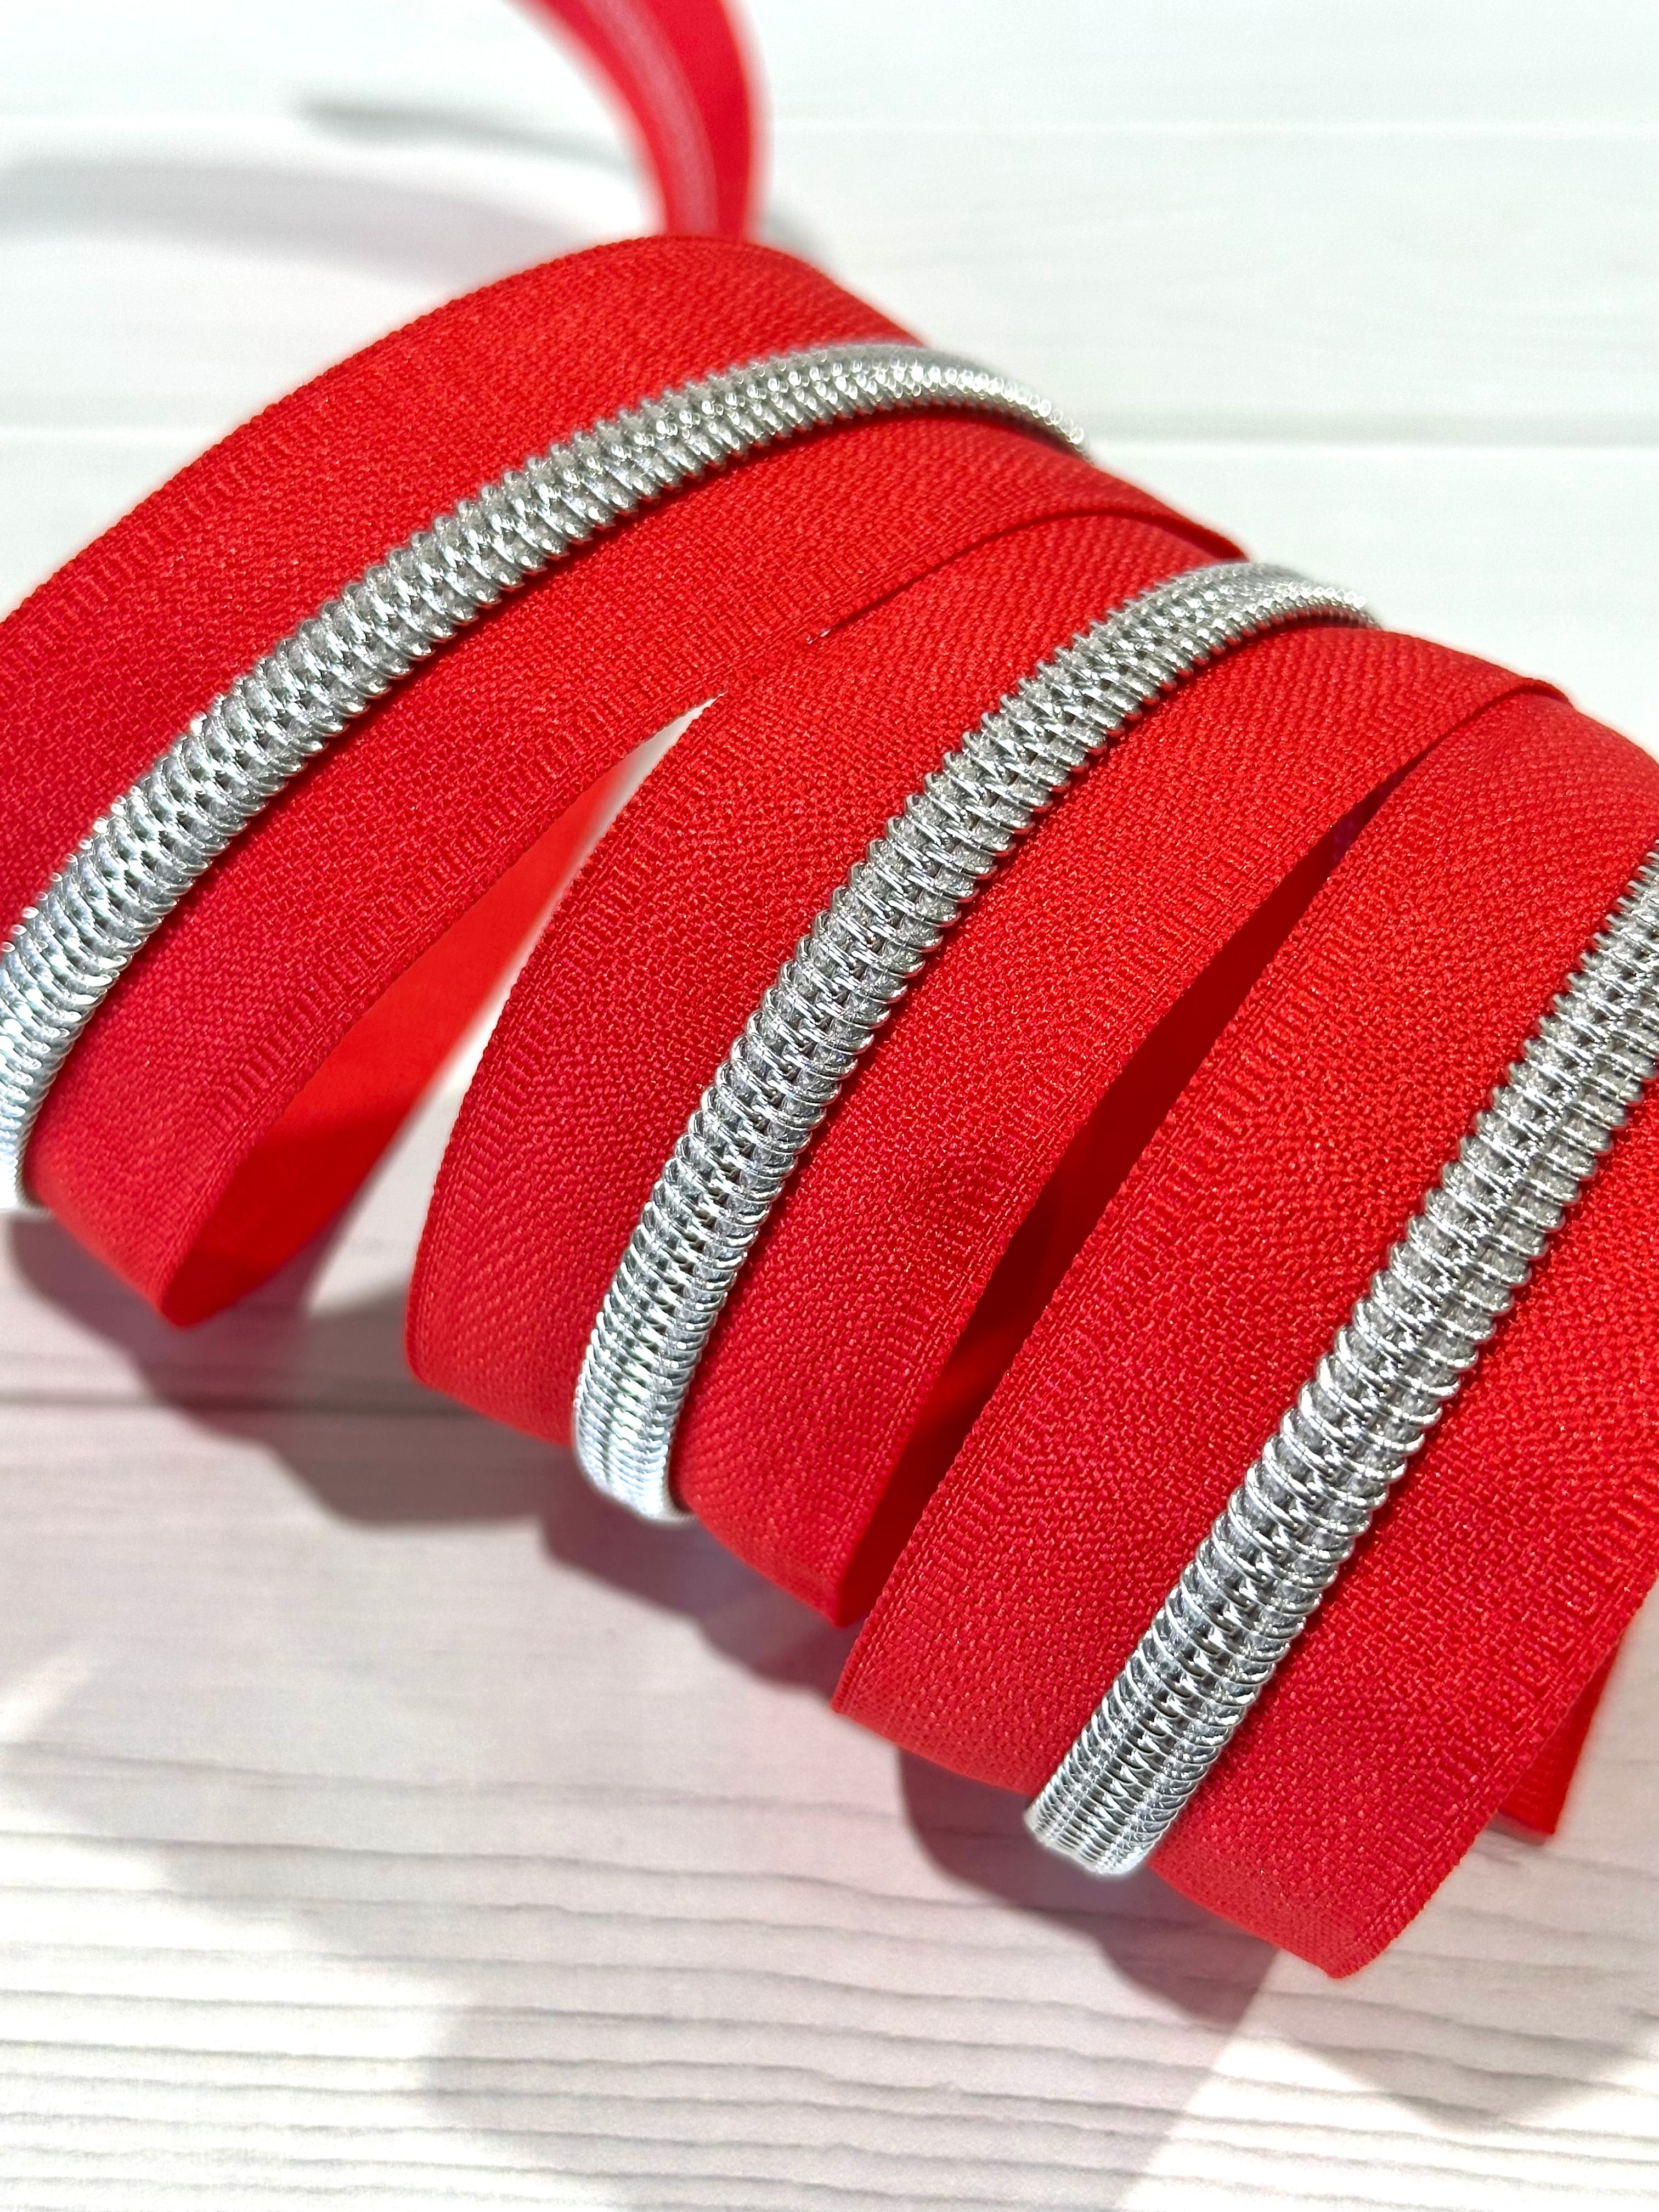 Red zipper tape with Silver teeth